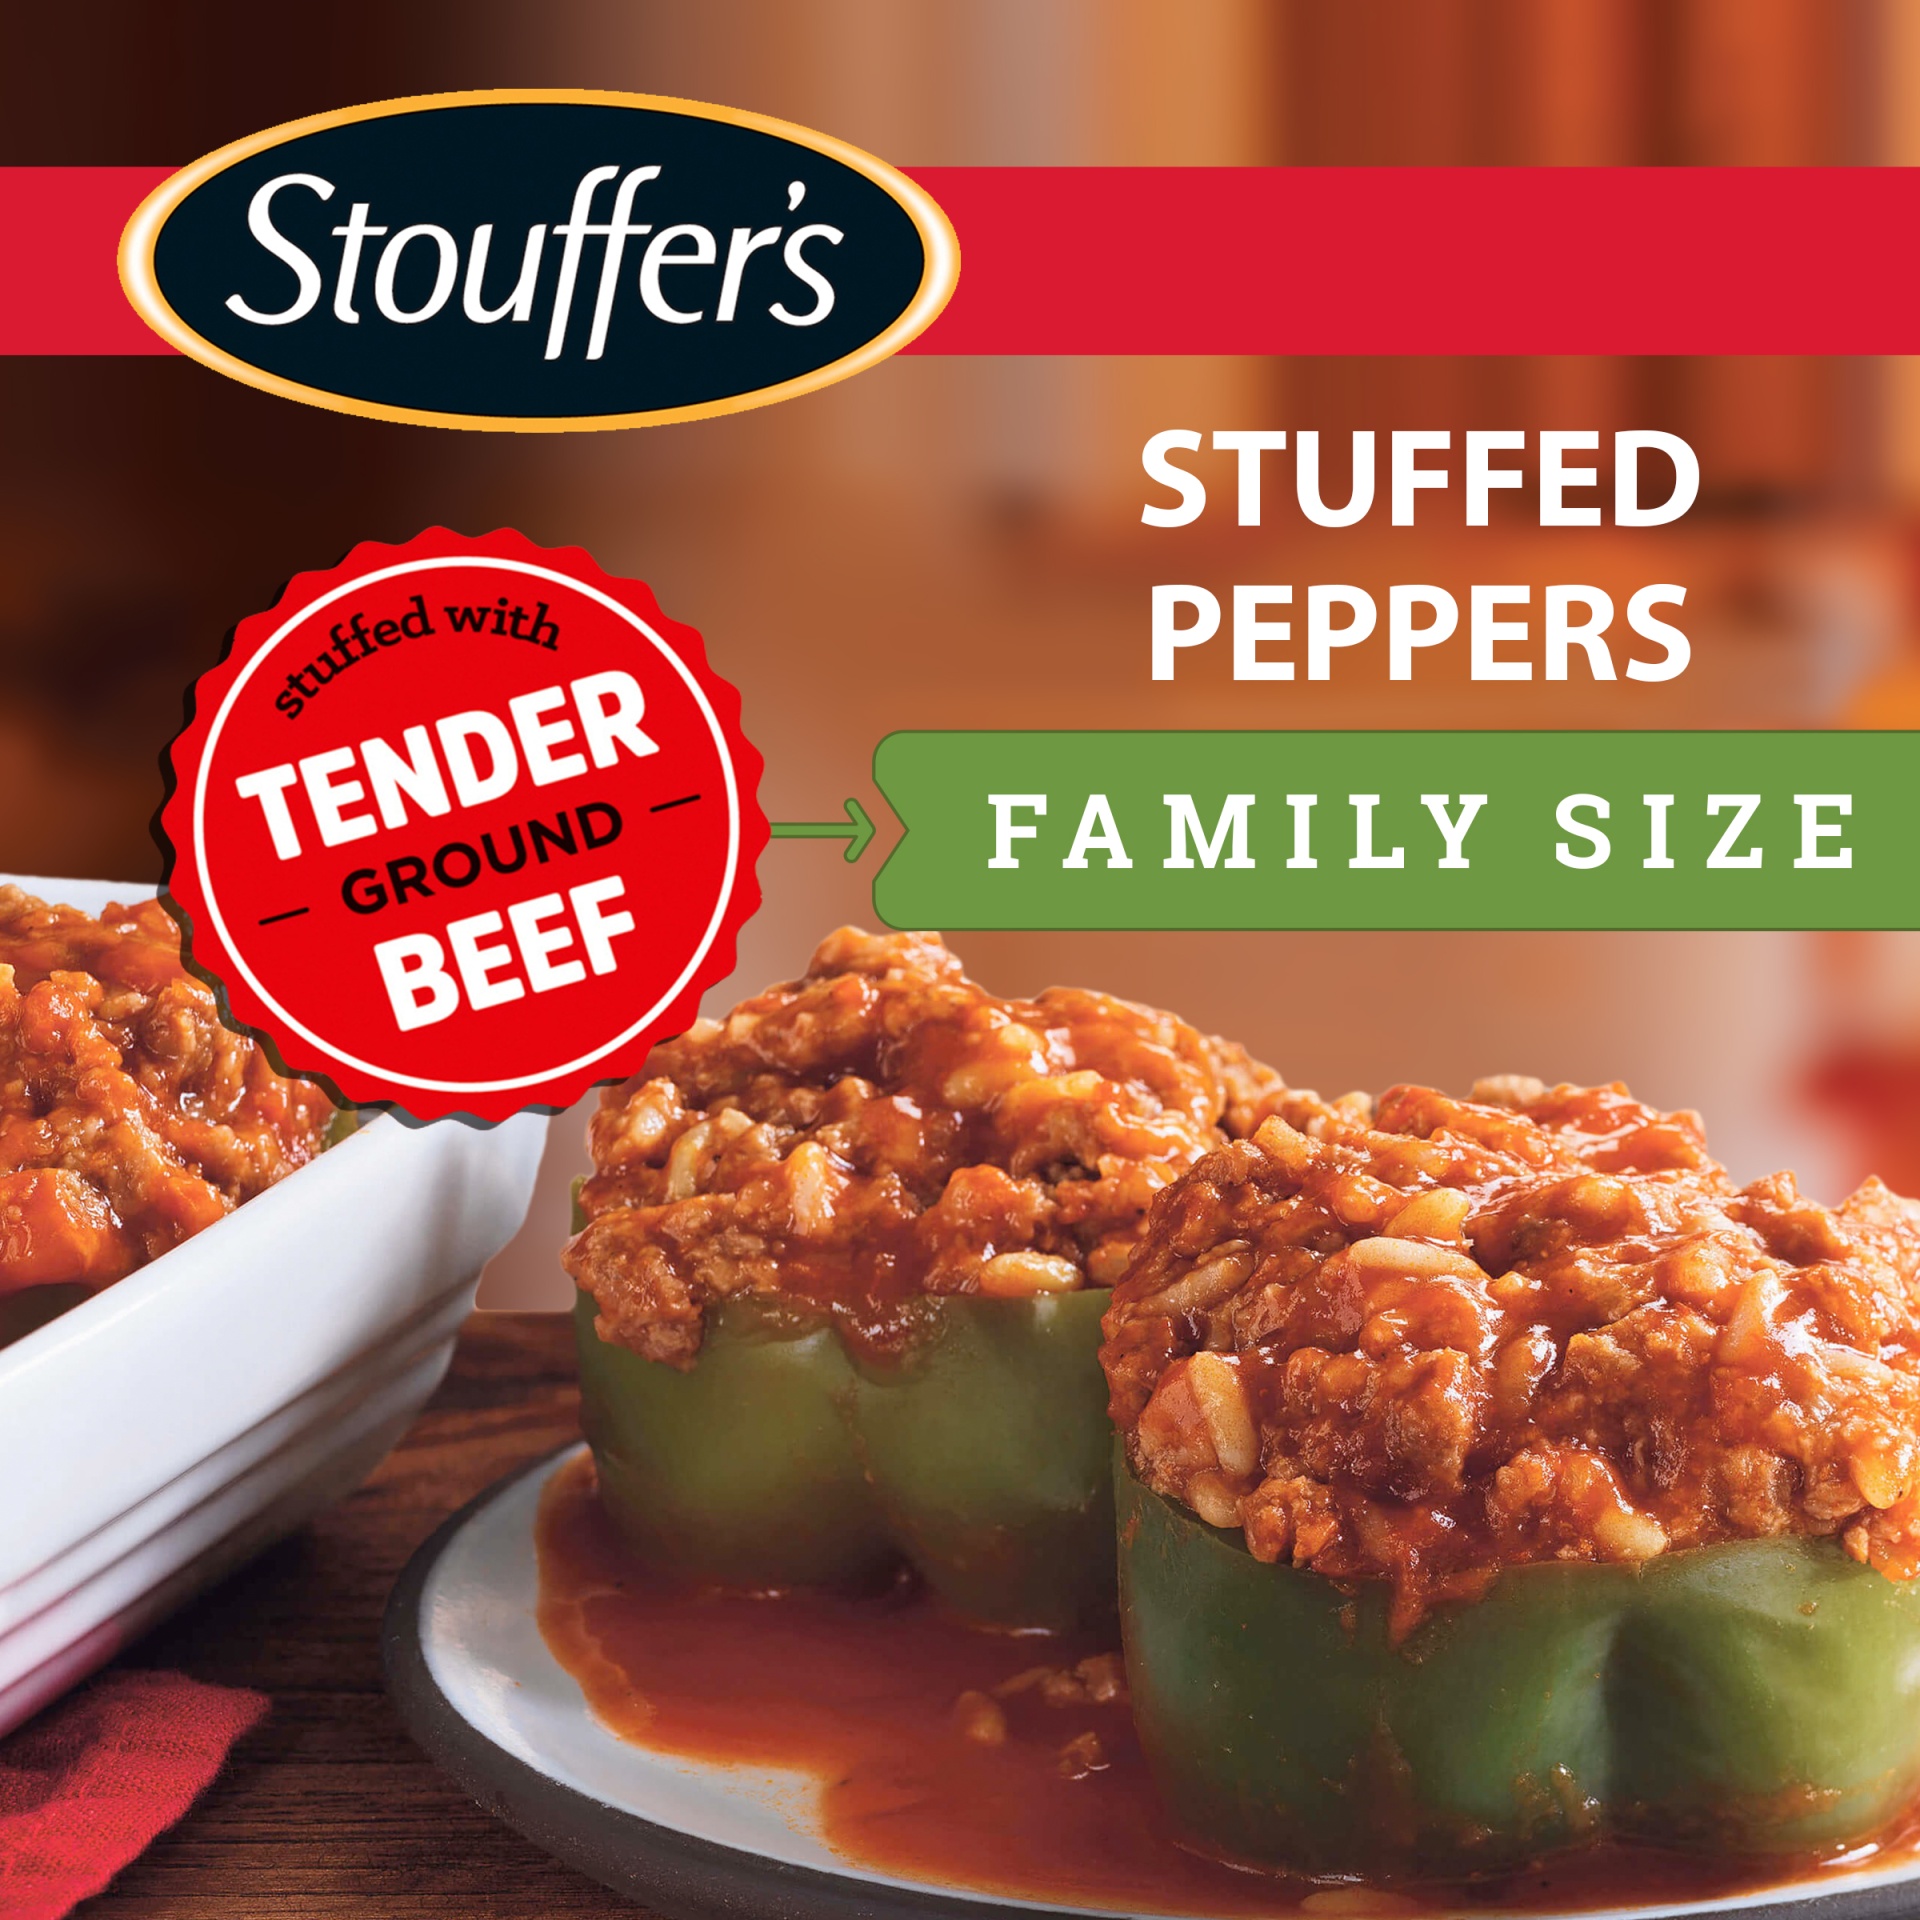 slide 5 of 6, Stouffer's Family Size Stuffed Peppers, 32 oz